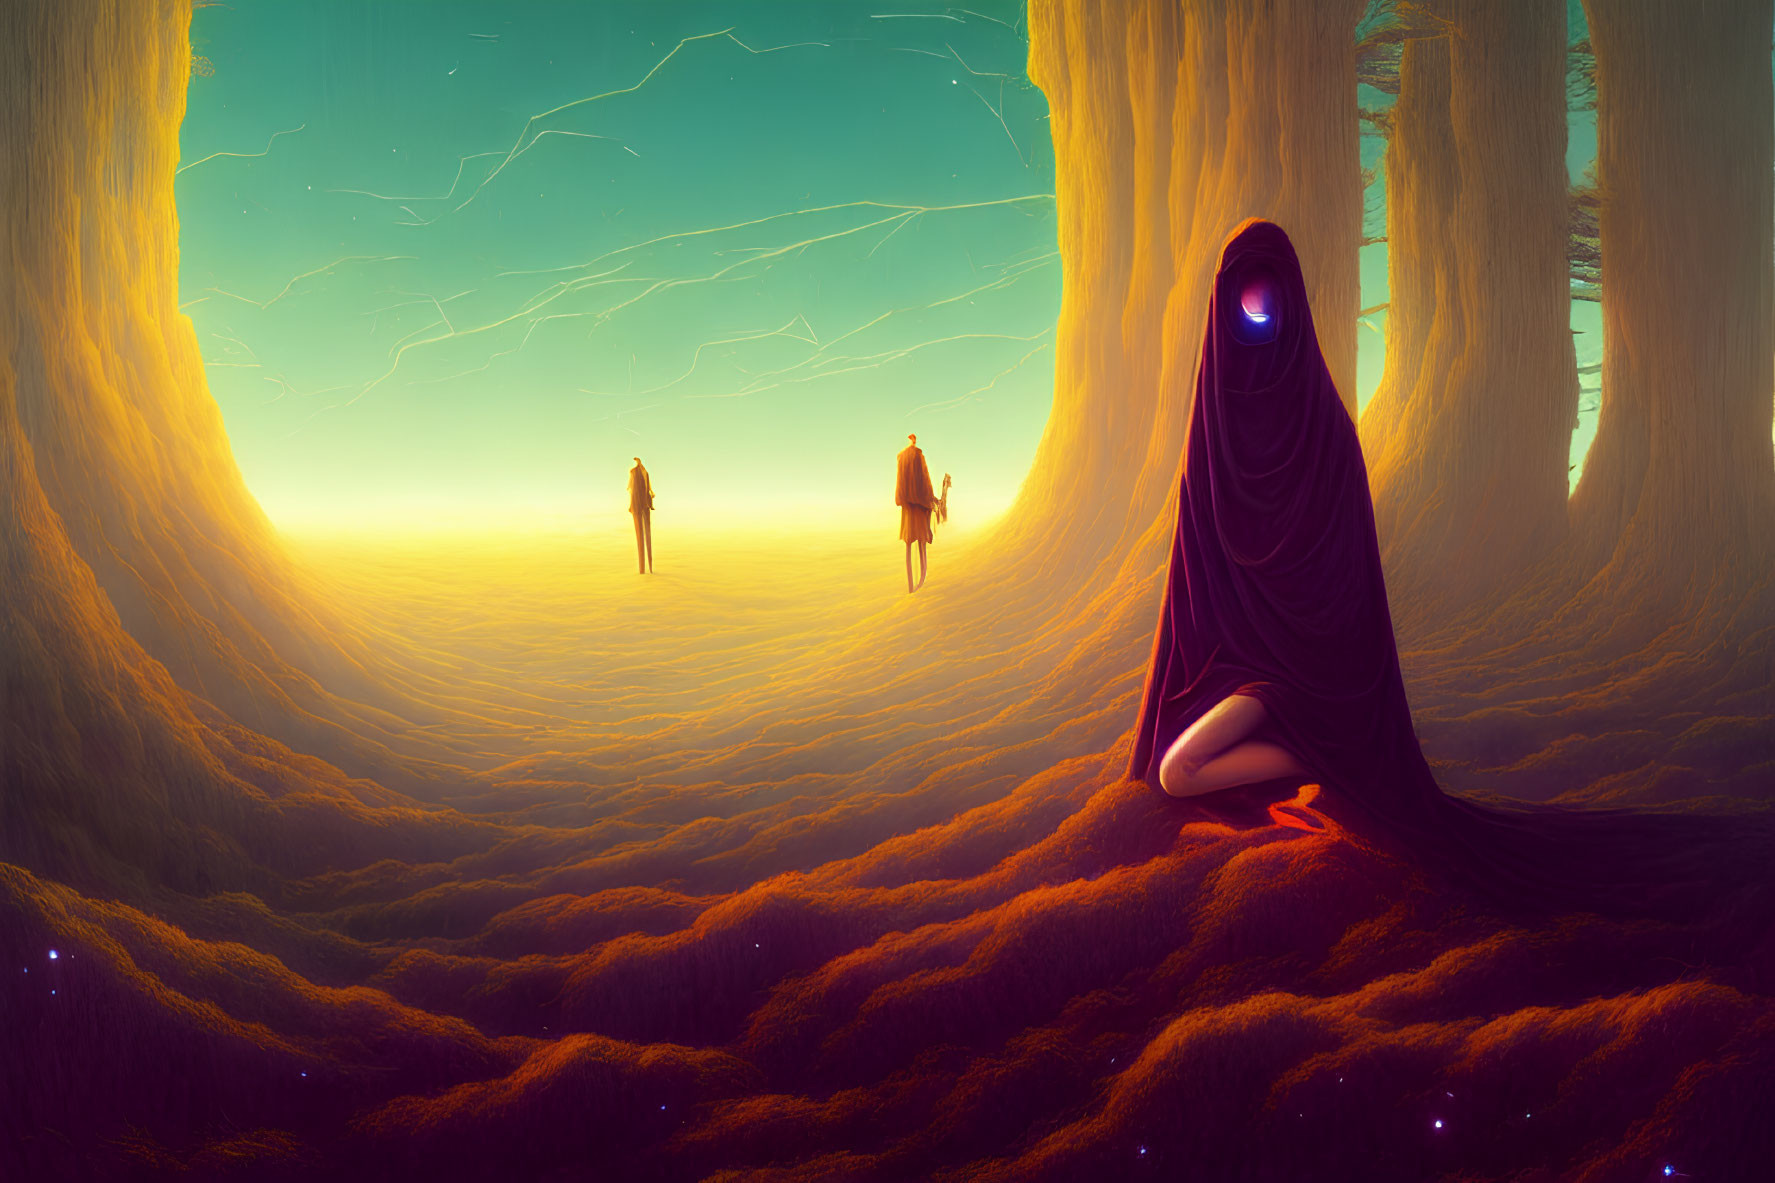 Surreal landscape with massive trees, cloaked figure, and ethereal lighting